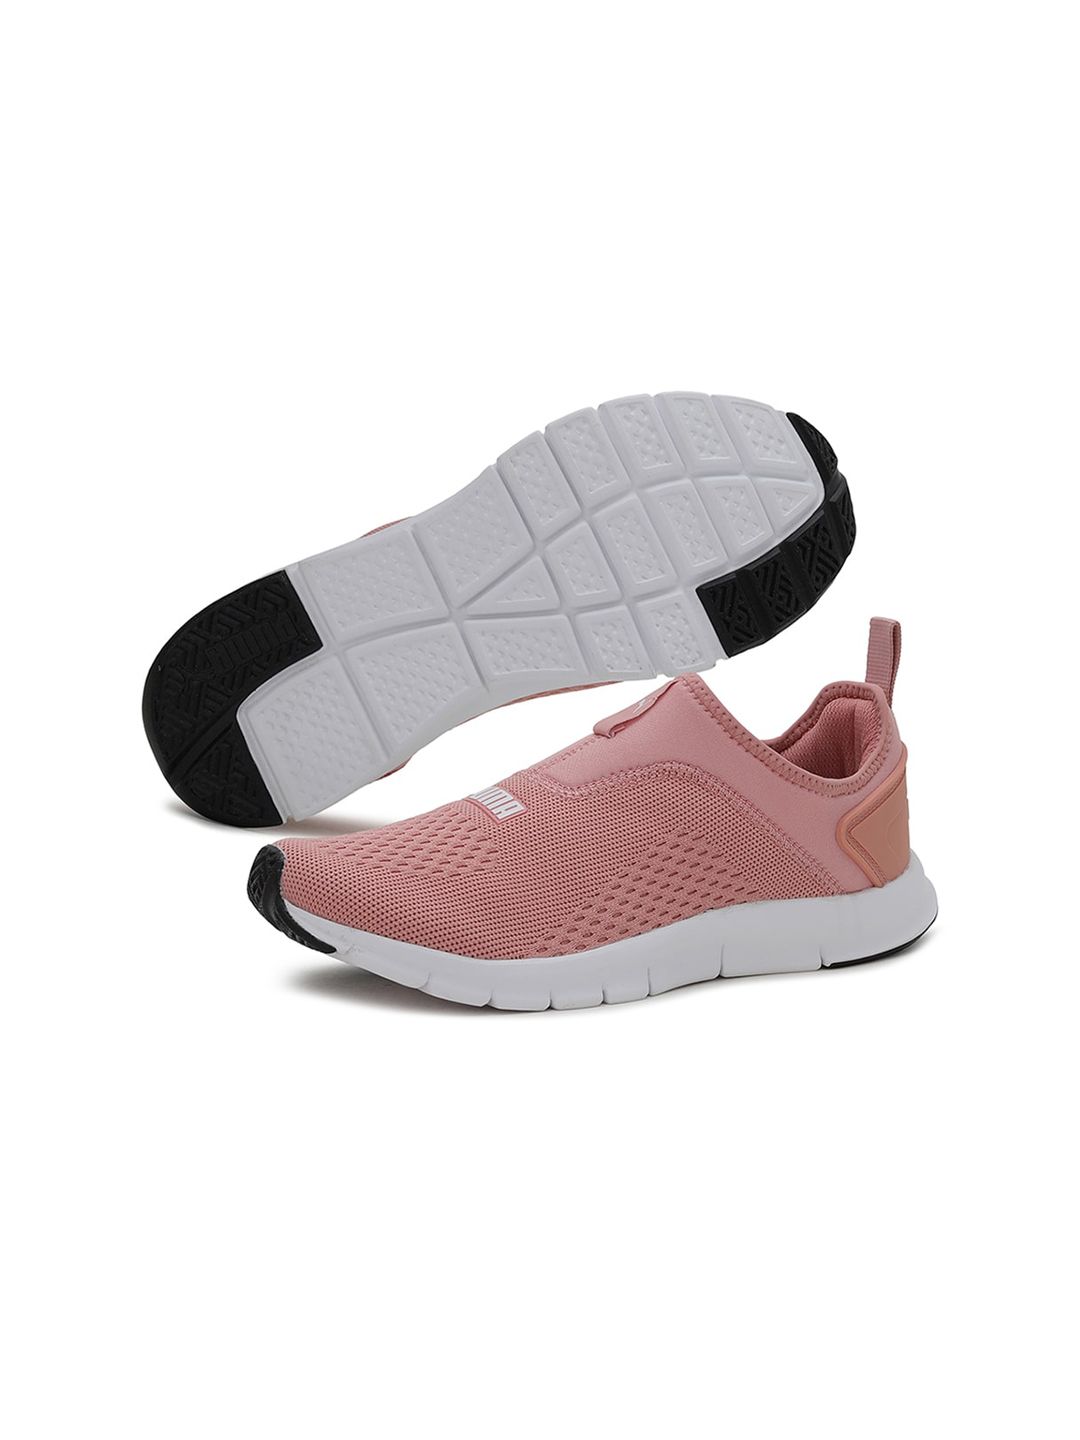 Puma Women Pink Solid Slip-On Casual Sneakers Price in India